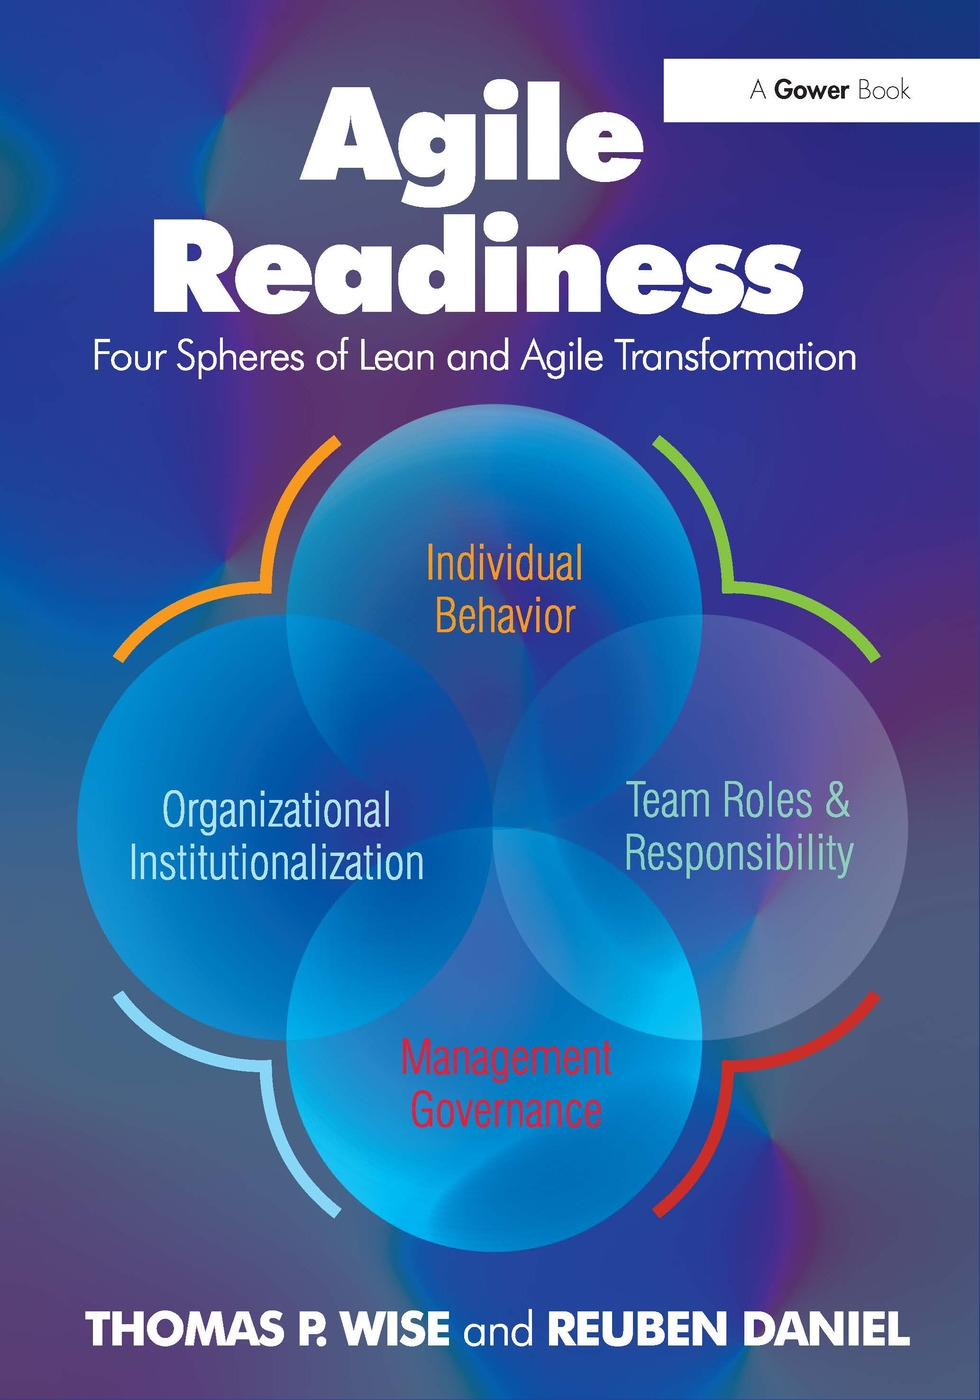 Agile Readiness: Four Spheres of Lean and Agile Transformation